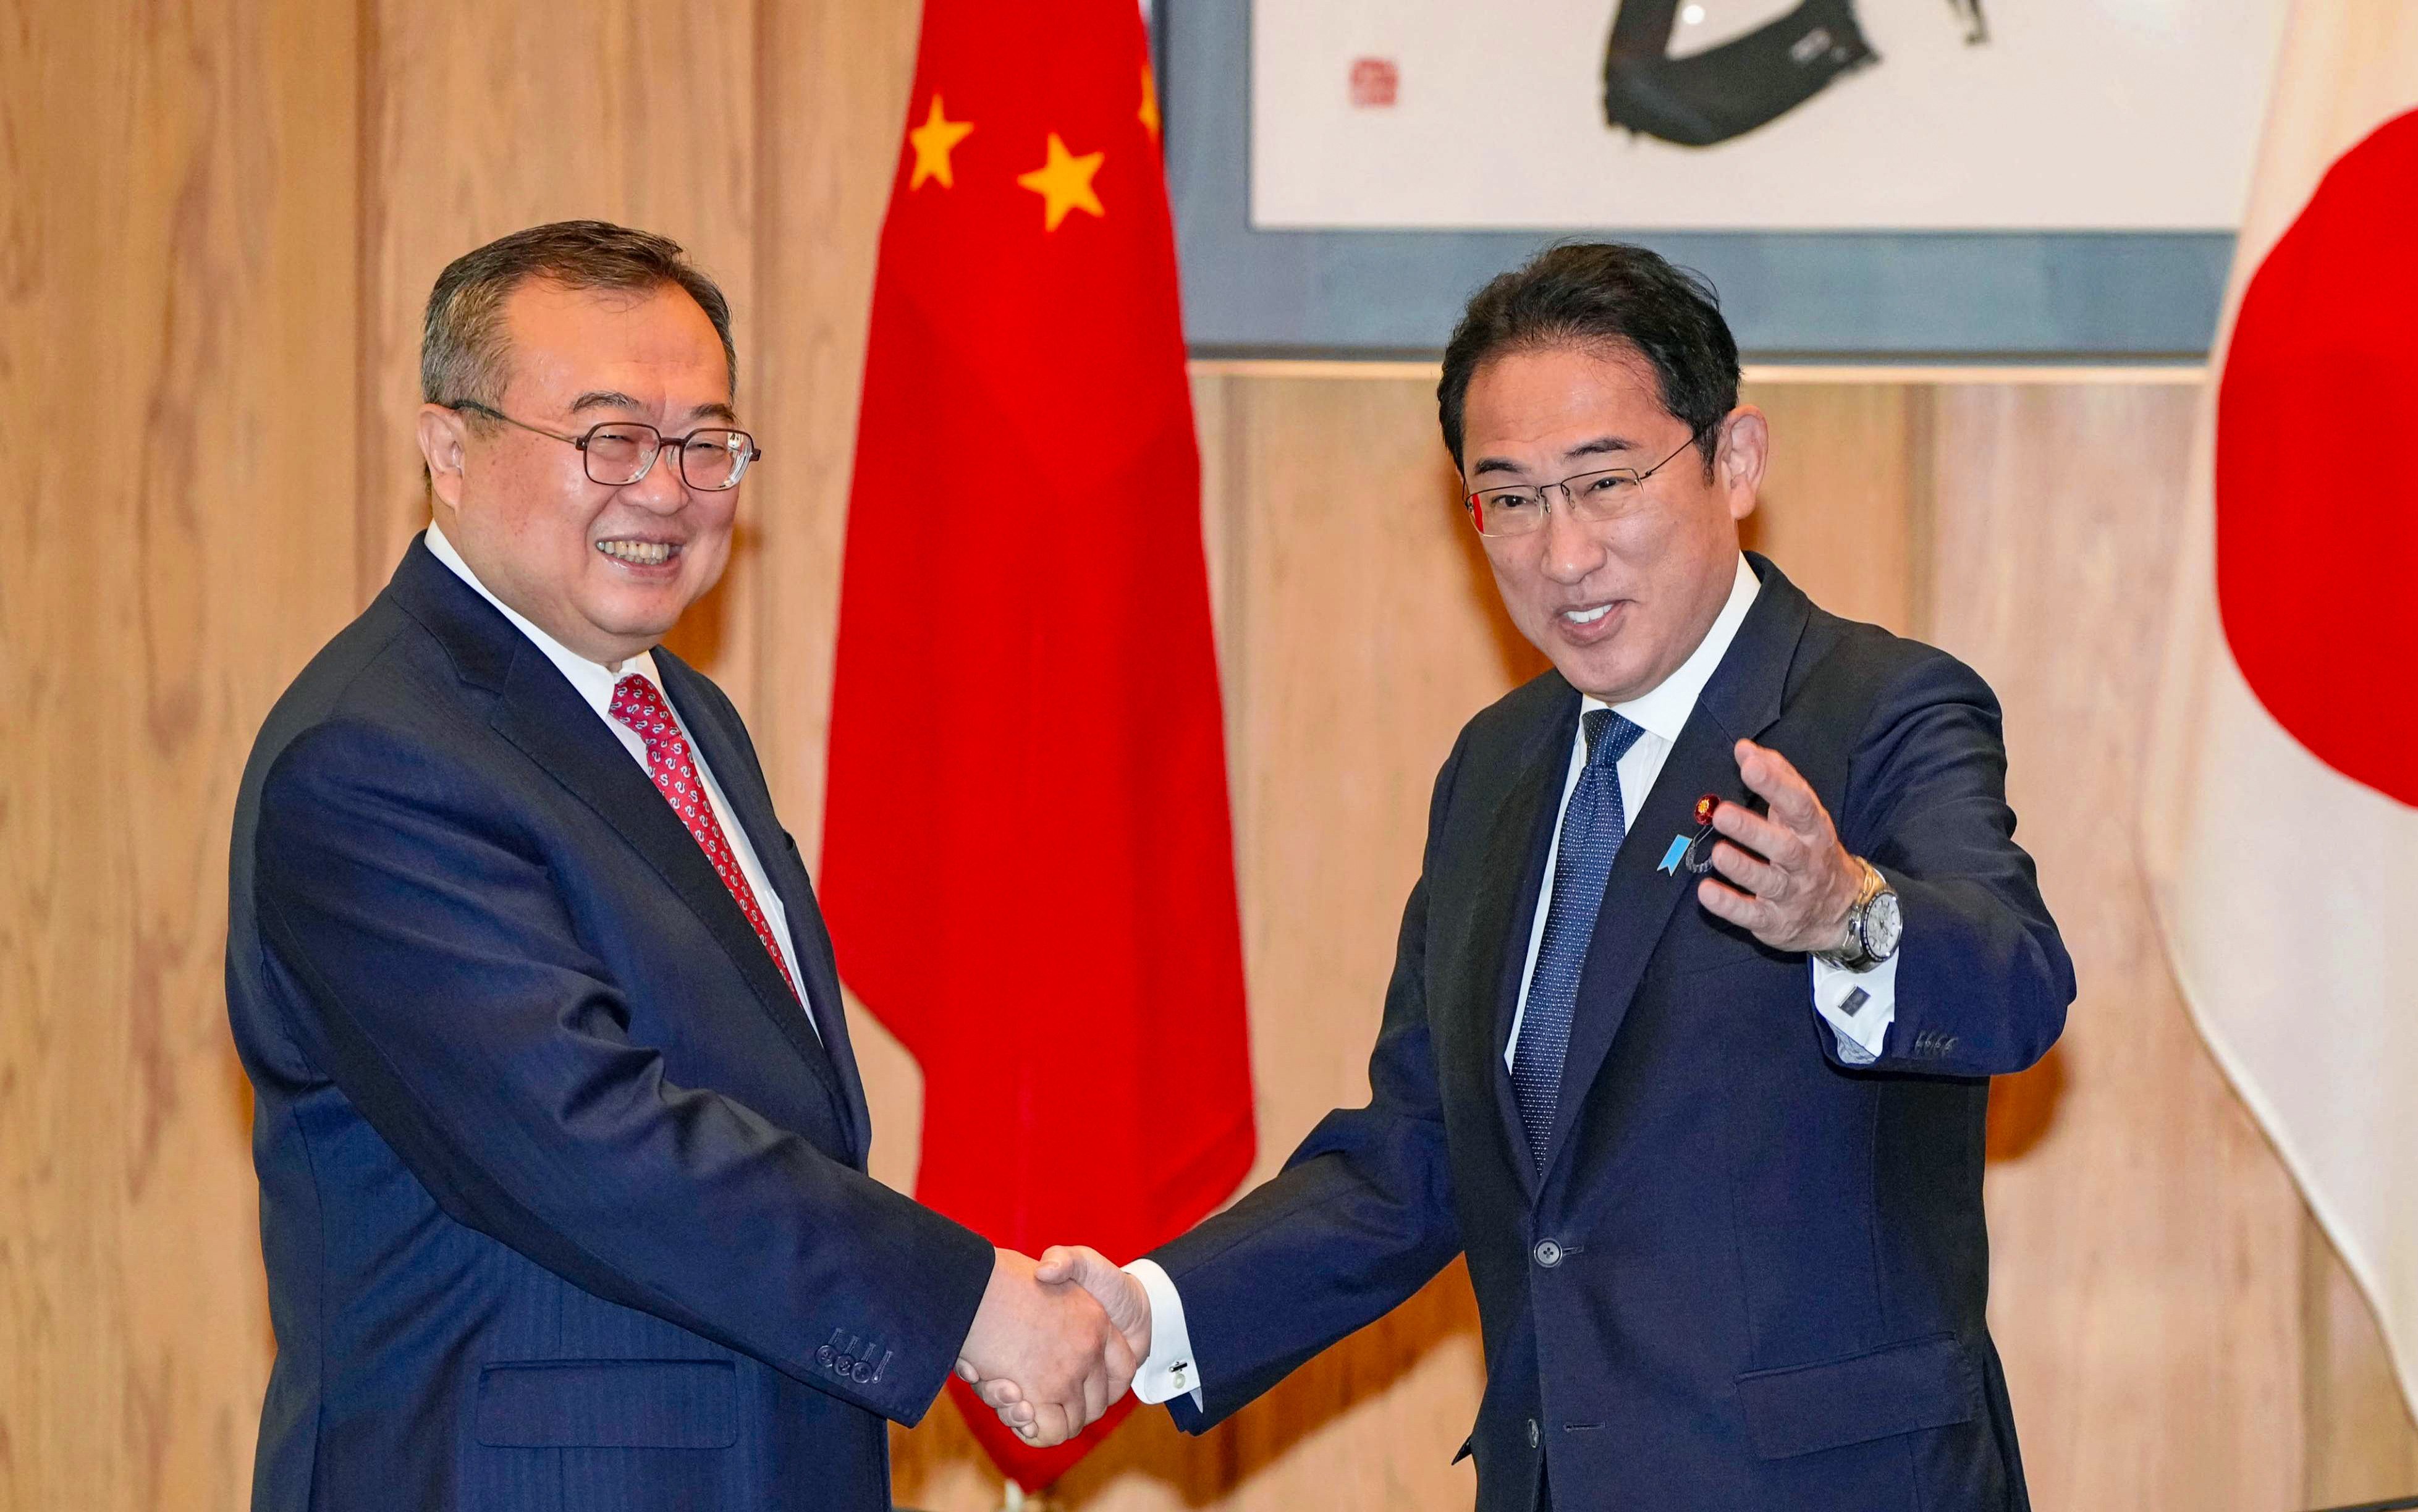 Liu Jianchao, head of the Communist Party’s International Department, with Japanese Prime Minister Fumio Kishida in Tokyo on Wednesday. Photo: Kyodo